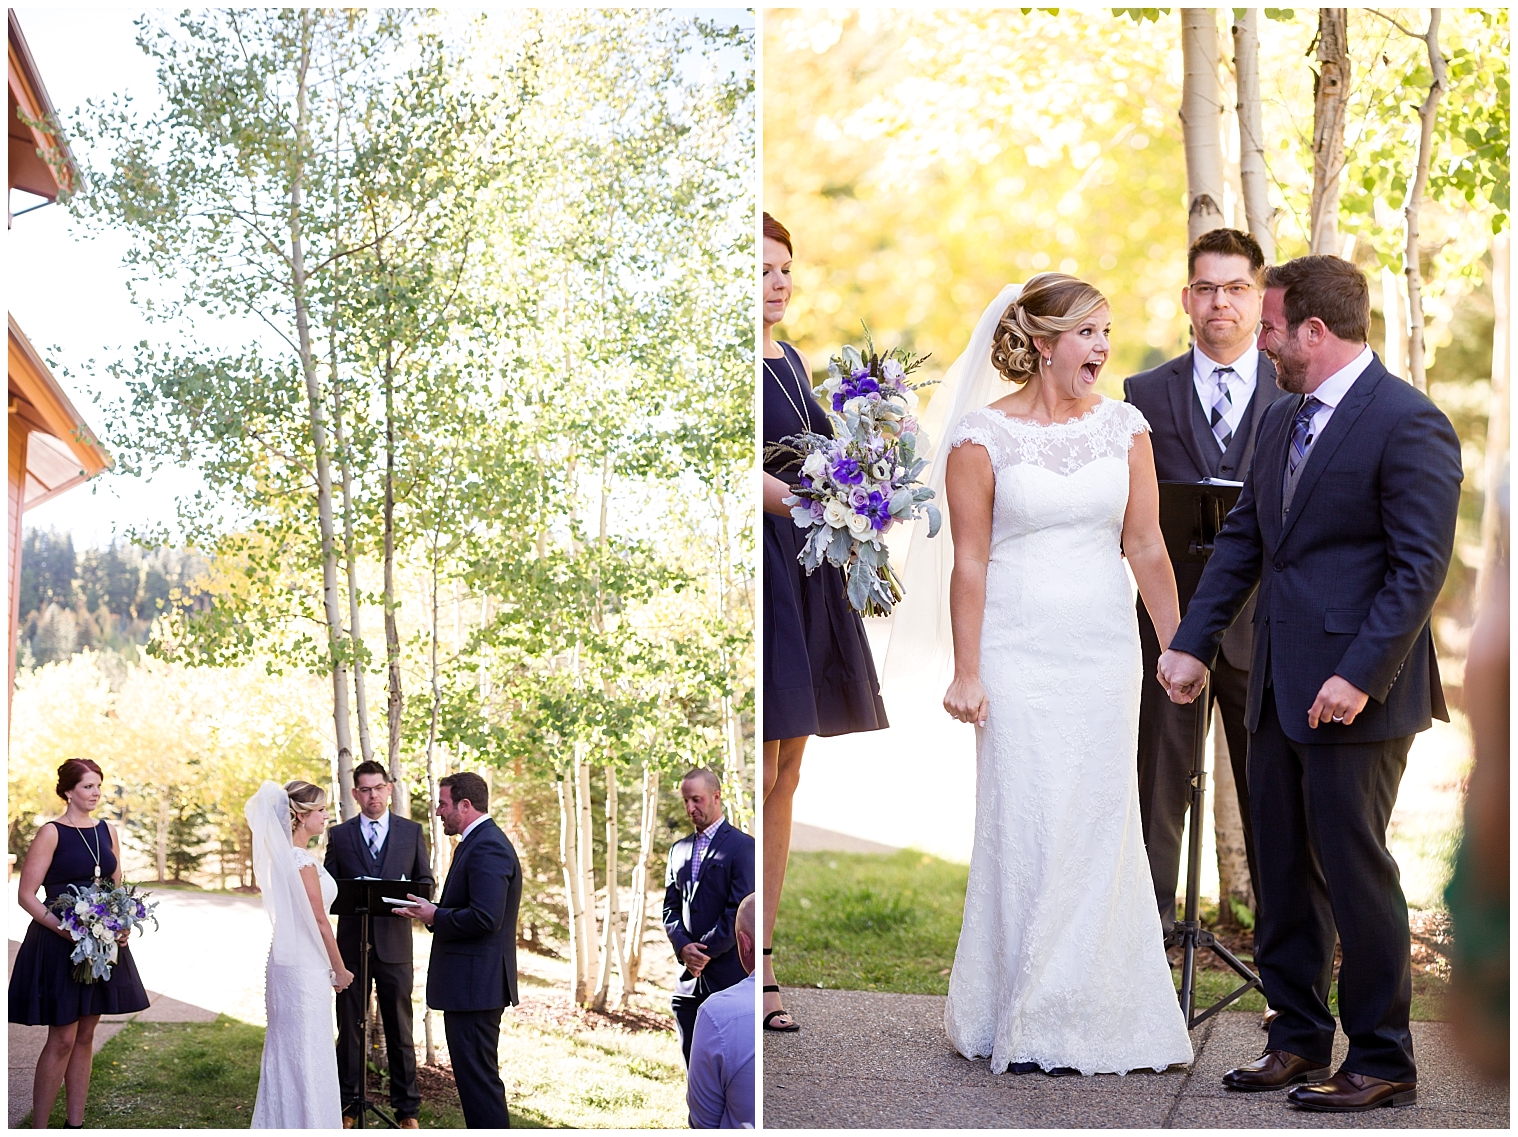 Bride and groom look triumphant at the conclusion of their Breckenridge wedding ceremony.